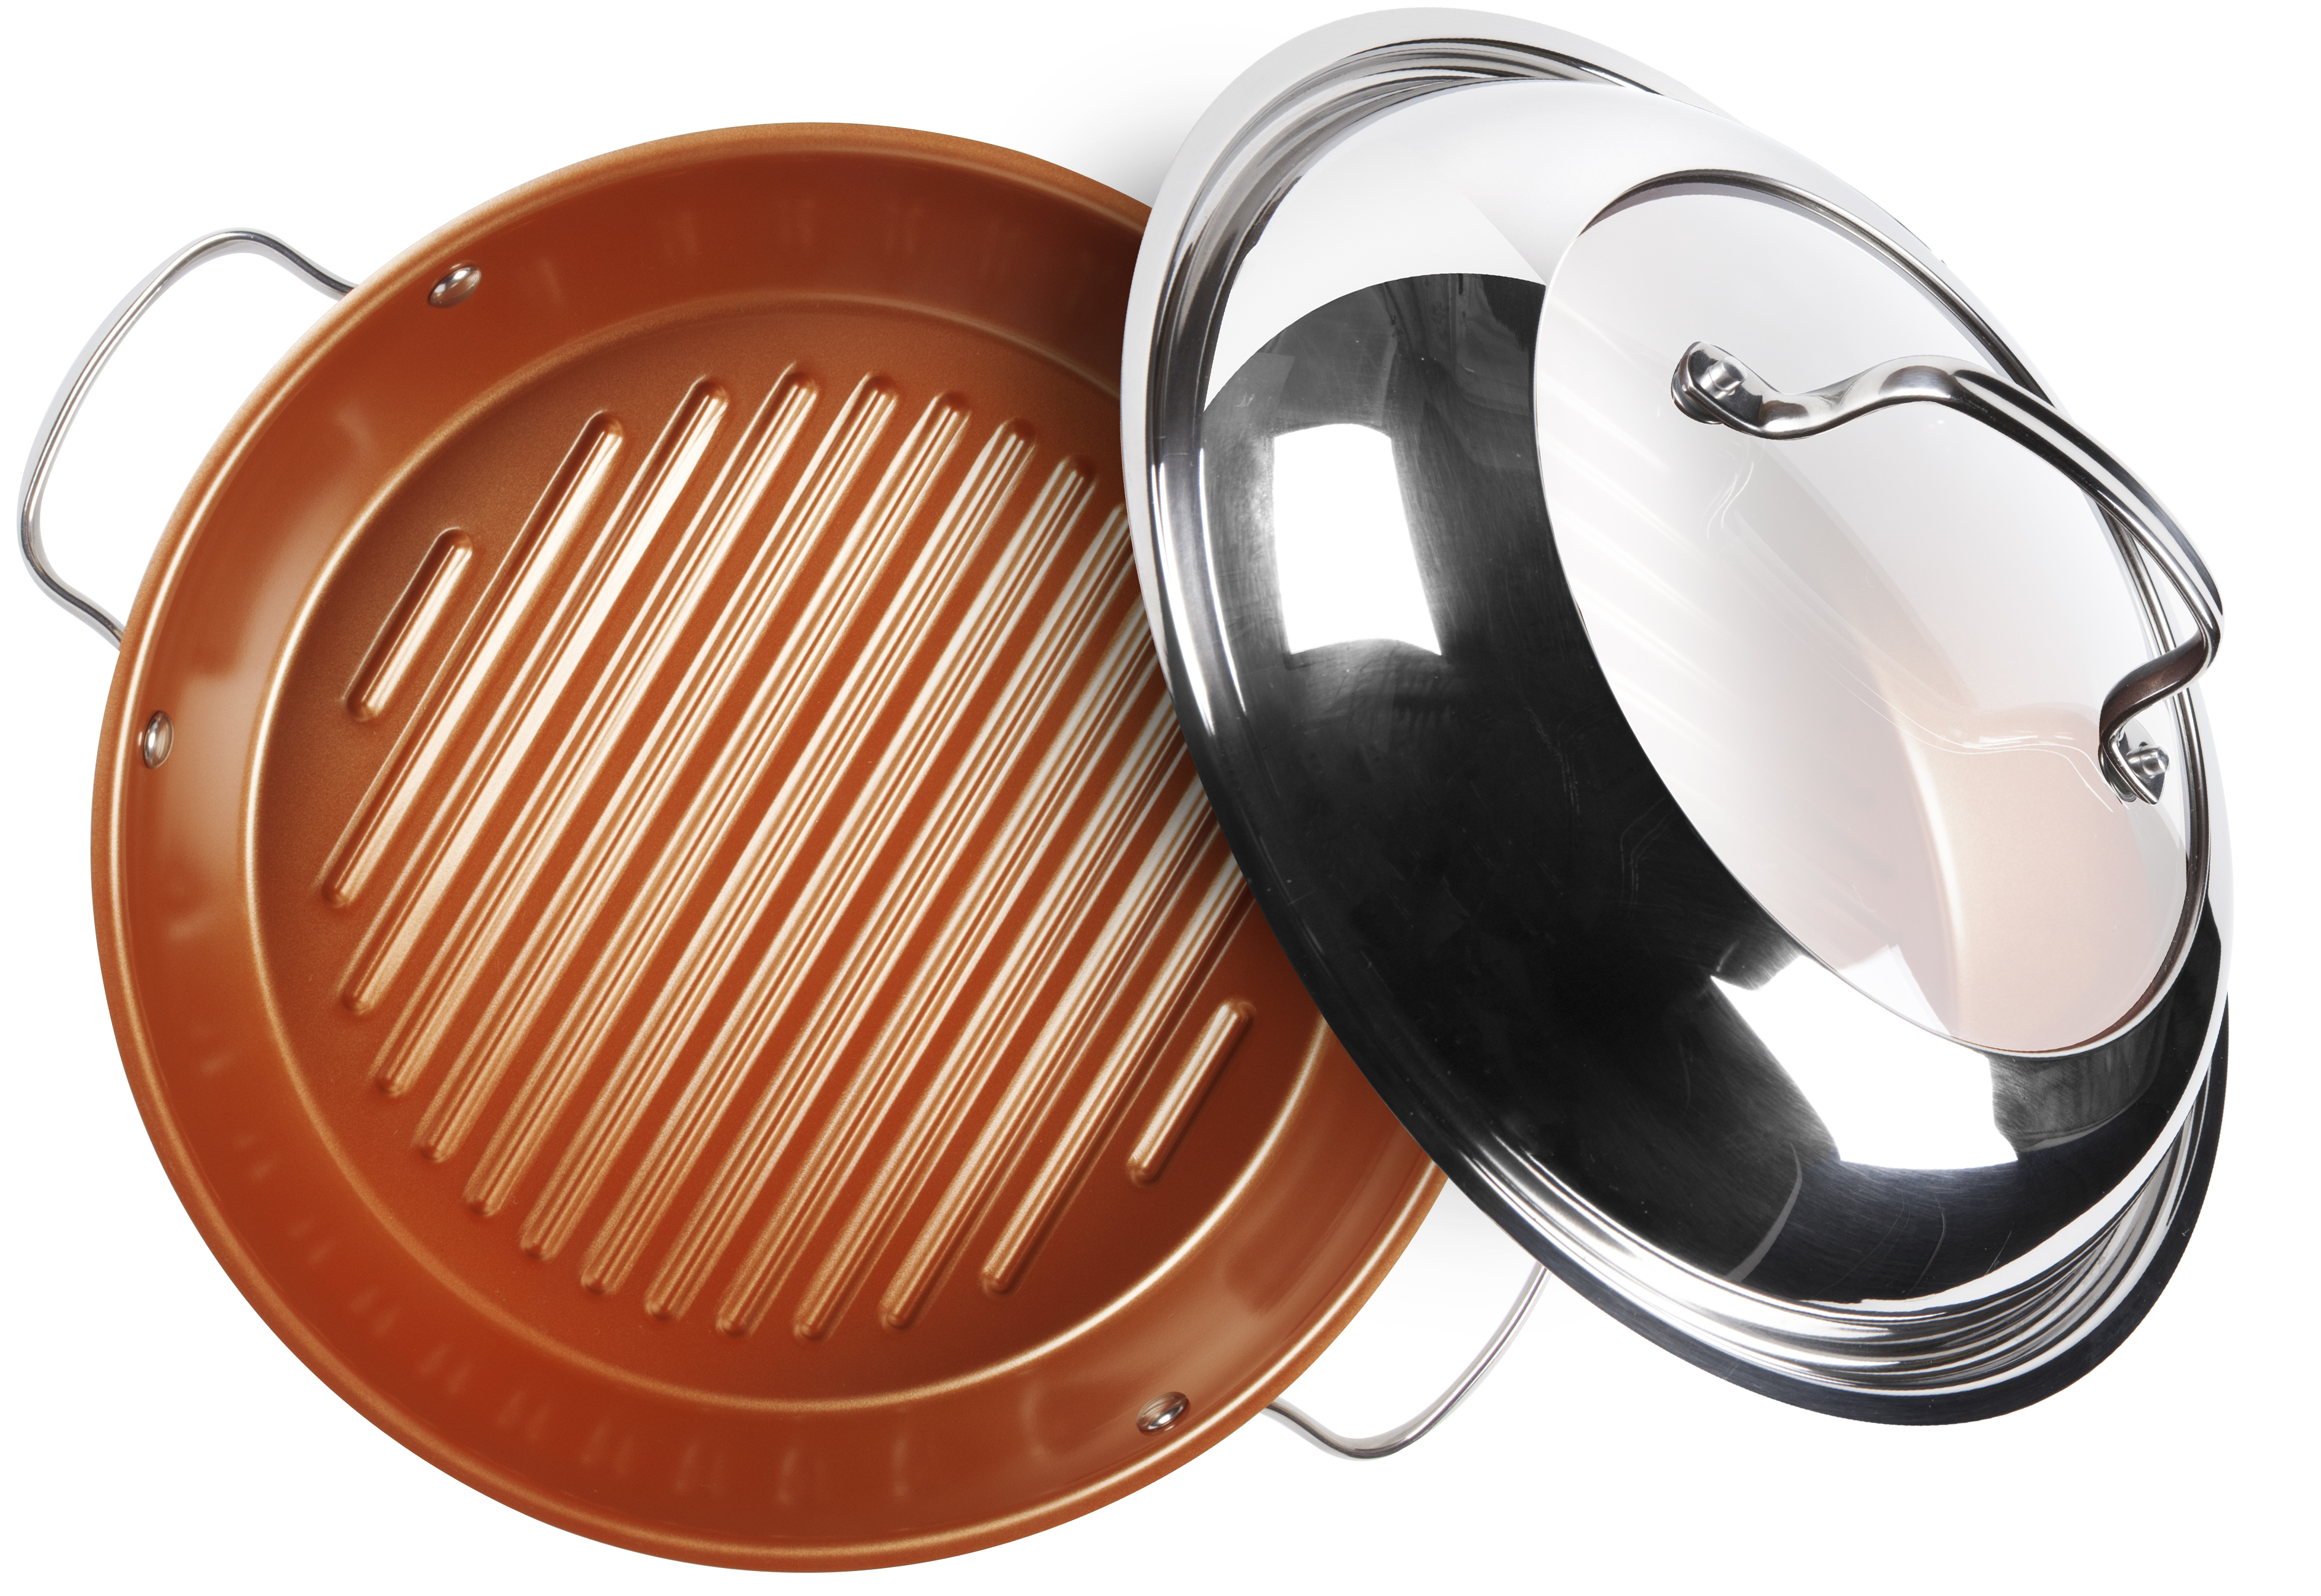 NuWave, LLC Expands Duralon Cookware Collection with Stainless Steel Grill  Pan - Kitchenware News & Housewares ReviewKitchenware News & Housewares  Review